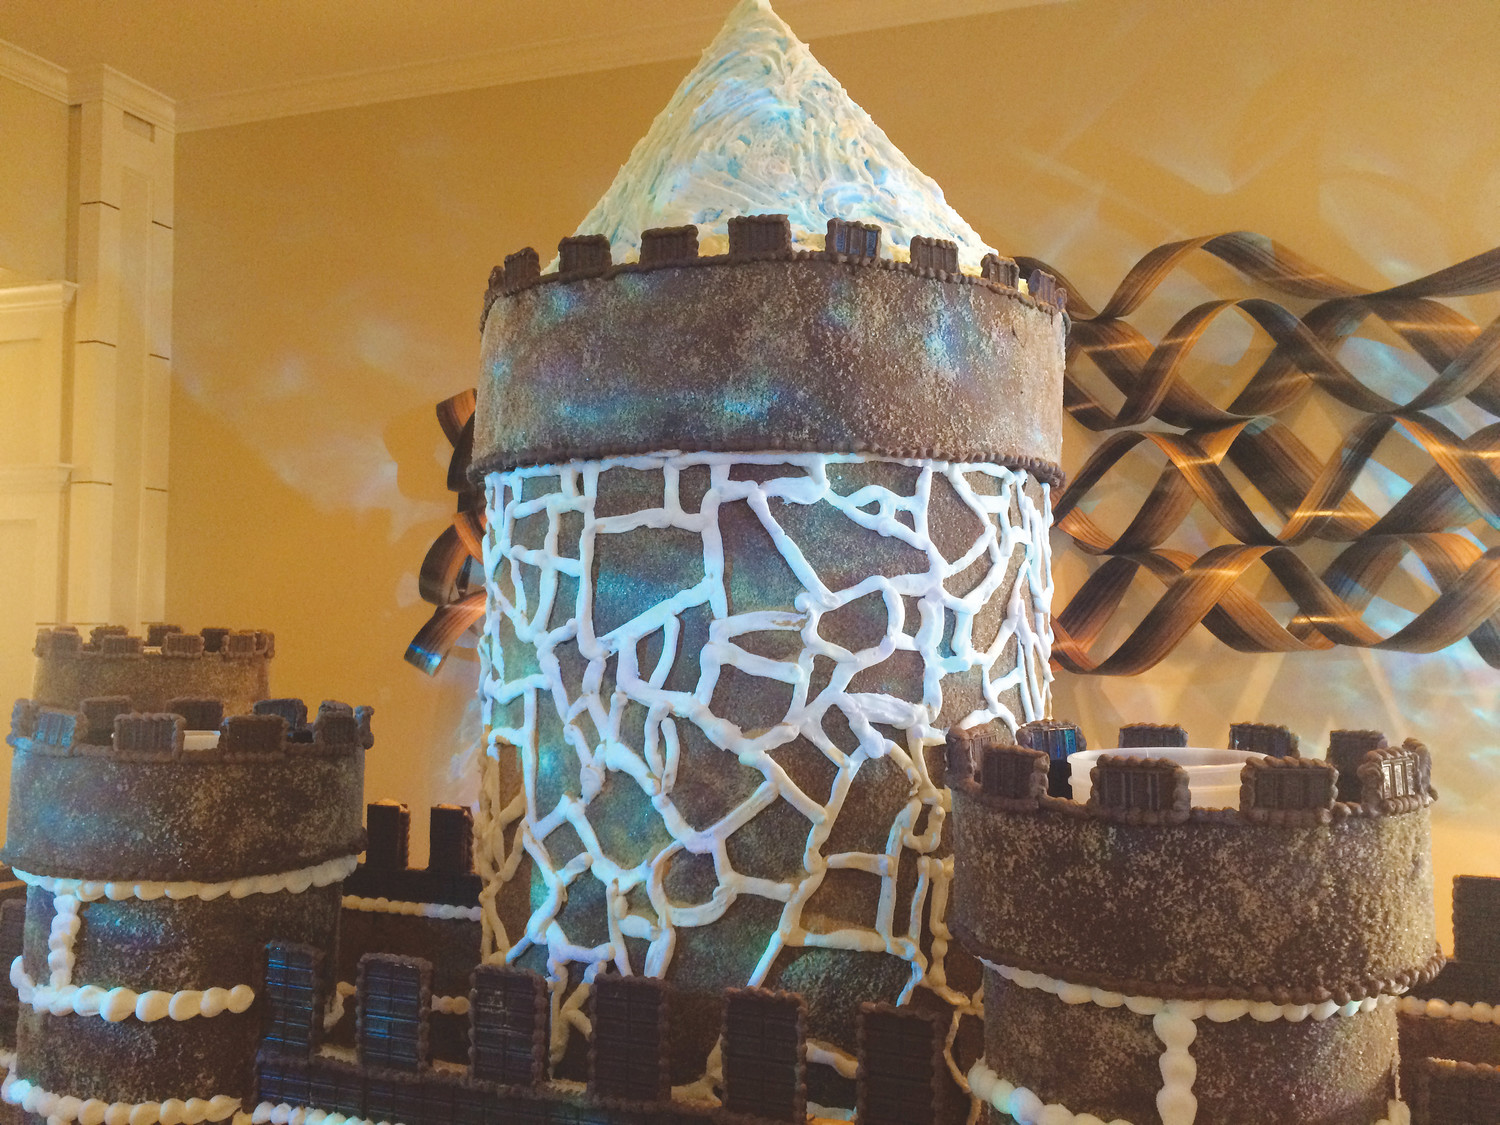 The gingerbread castle stands on full display at One Ocean Resort & Spa.